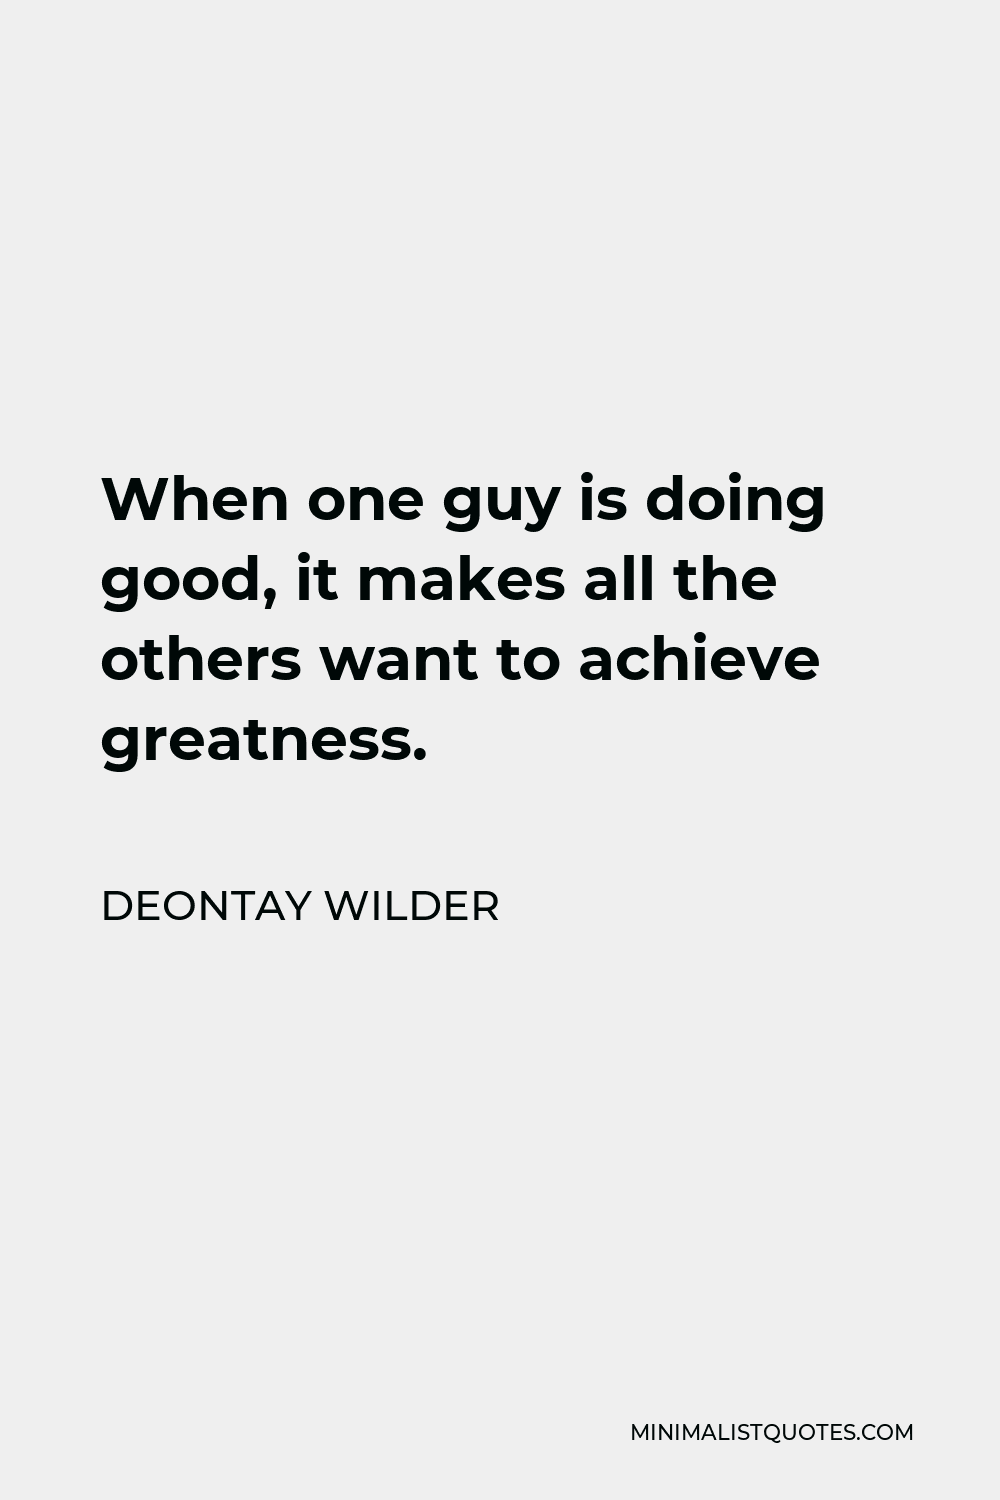 Deontay Wilder Quote - When one guy is doing good, it makes all the others want to achieve greatness.